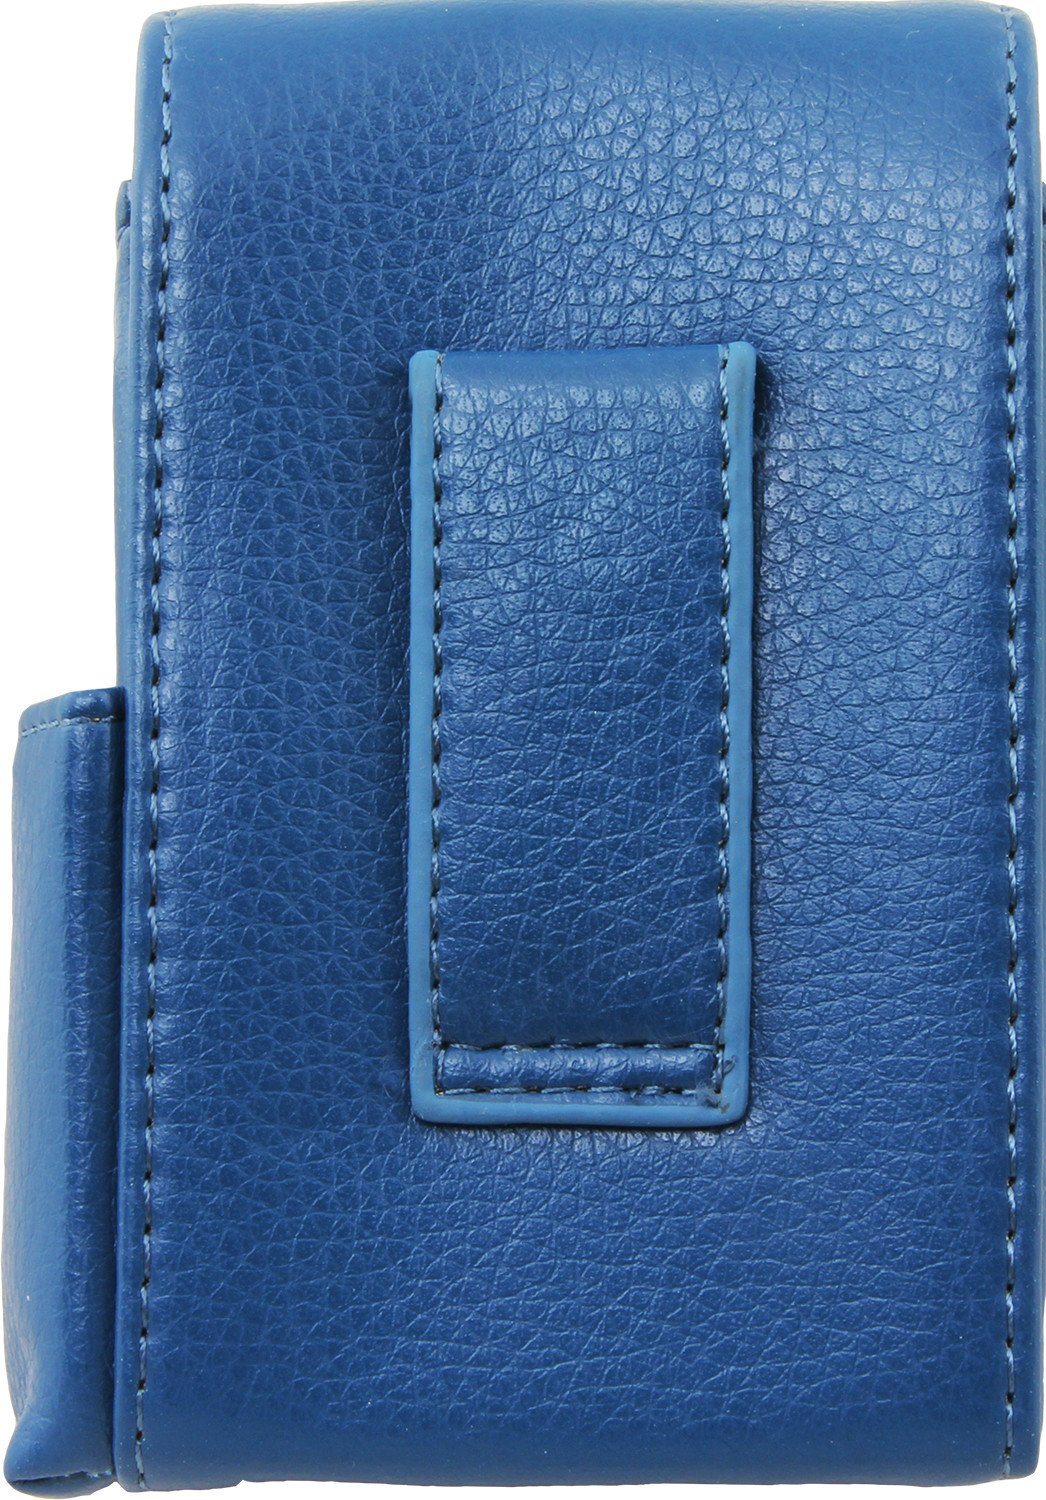 blue leather tobacco pouch with lighter case paper holder and filter pocket  Touch